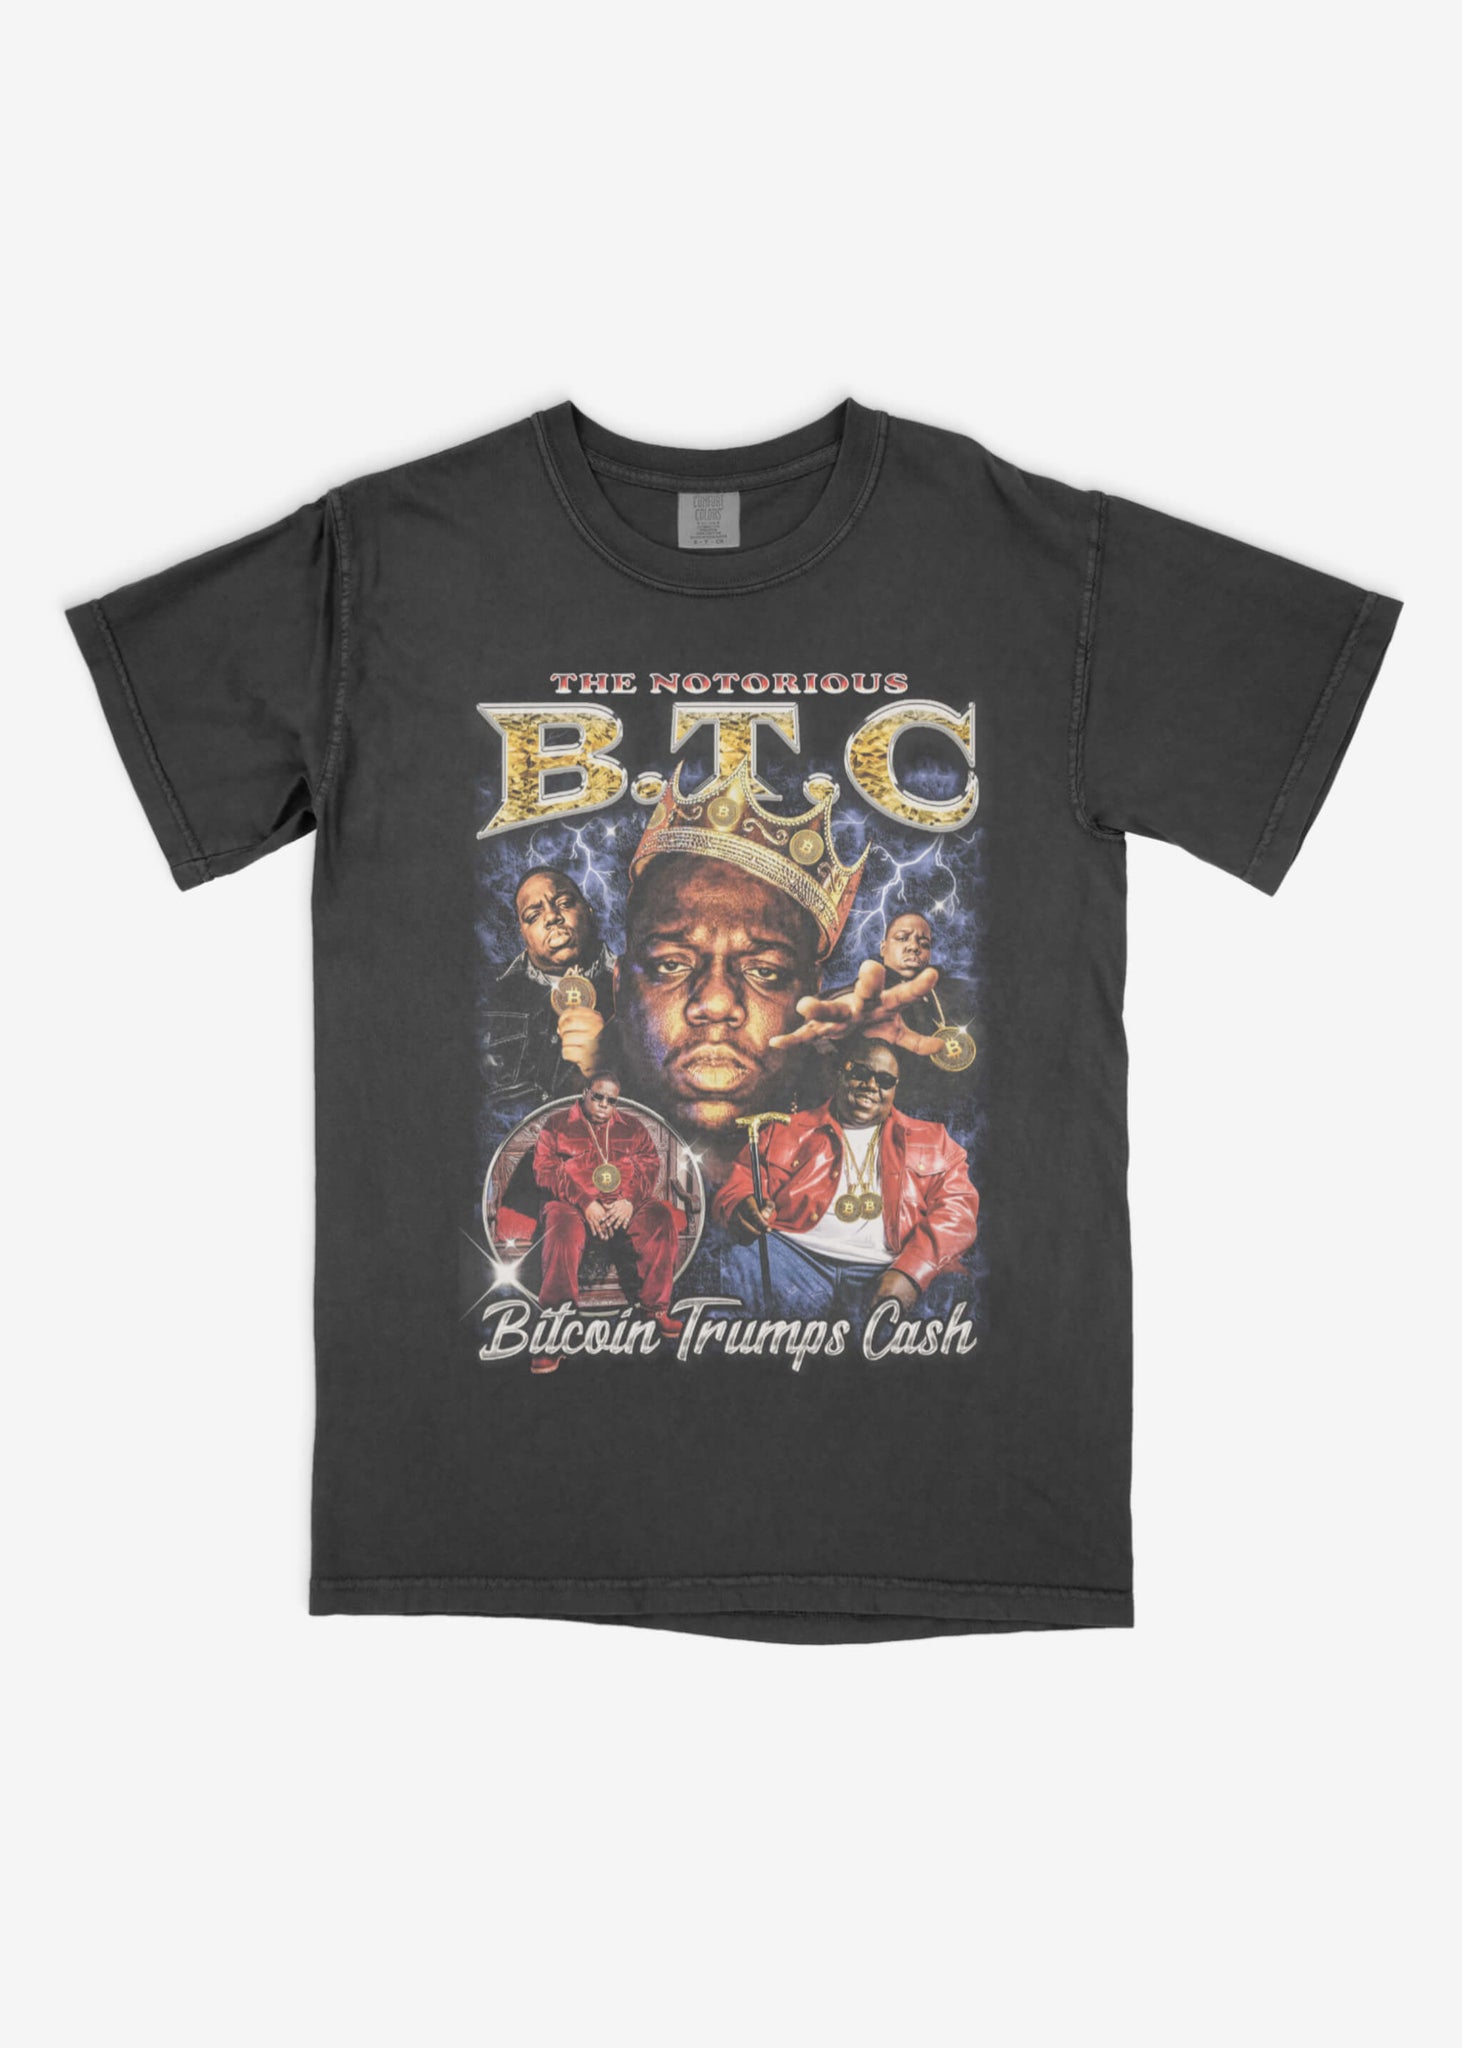 "The Notorious B.T.C." Tee